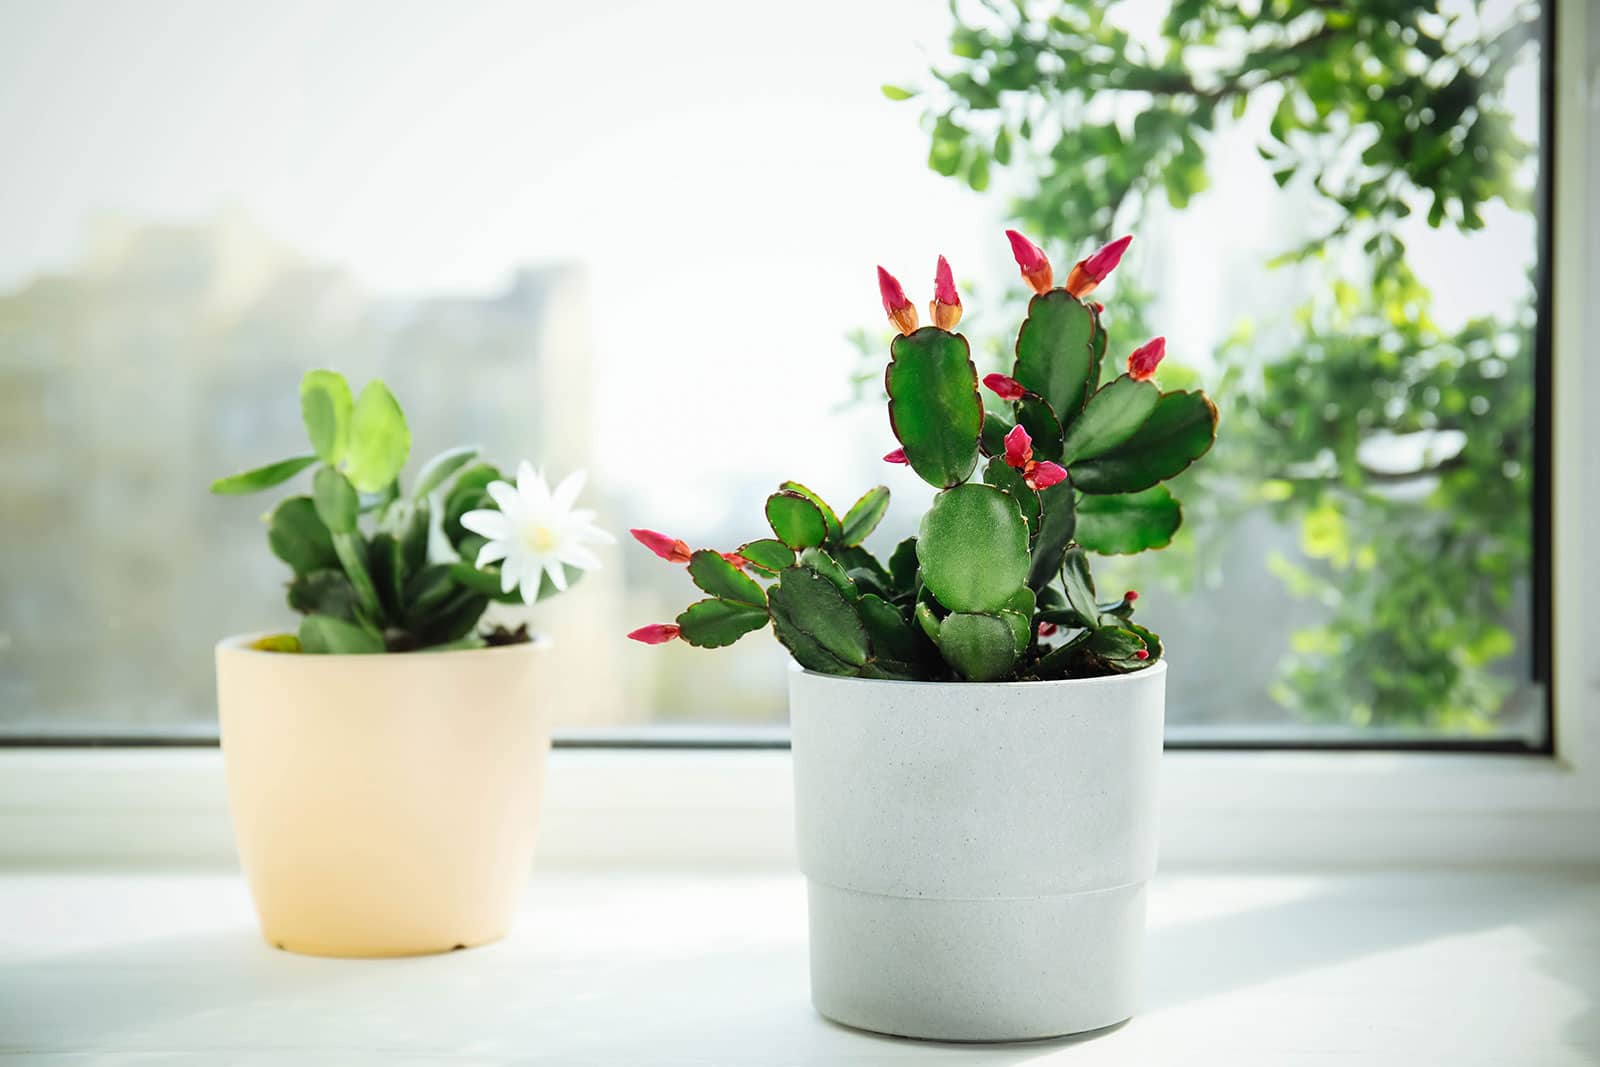 Two small holiday cactus houseplants sitting on a windowsill, the left pot has a white flower and the right pot has red flower buds